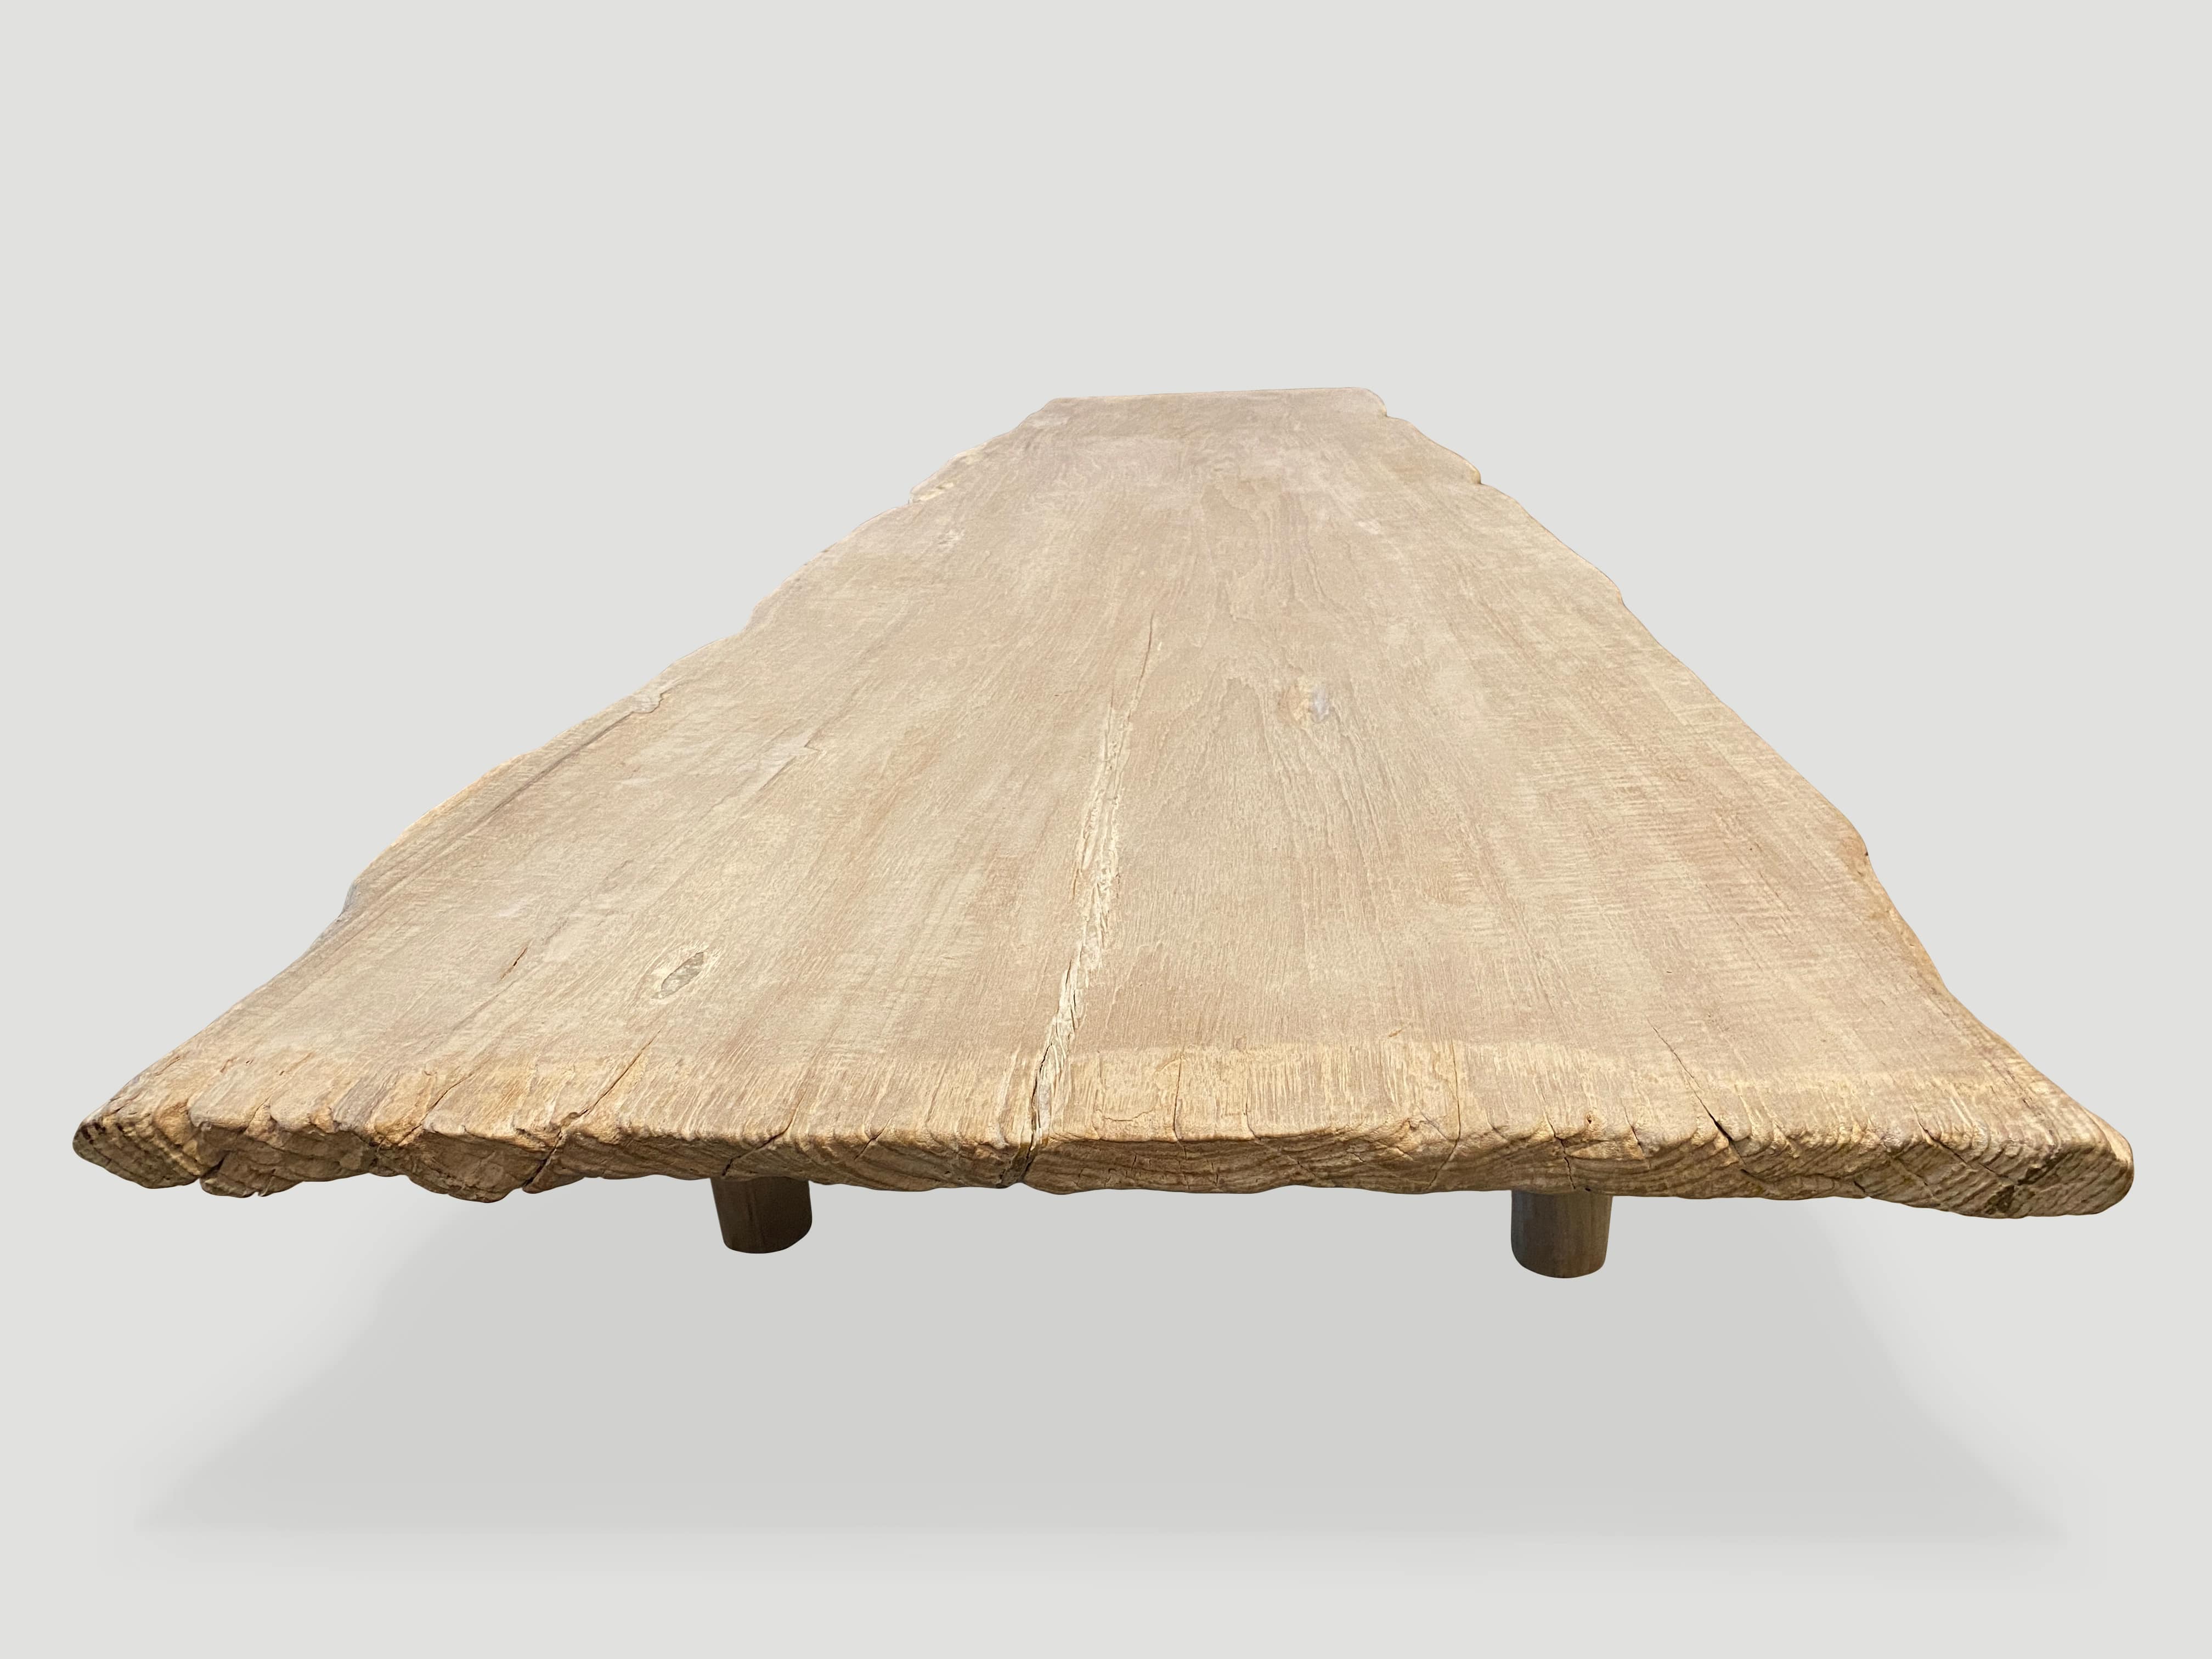 MINIMALIST BLEACHED TEAK COFFEE TABLE OR BENCH